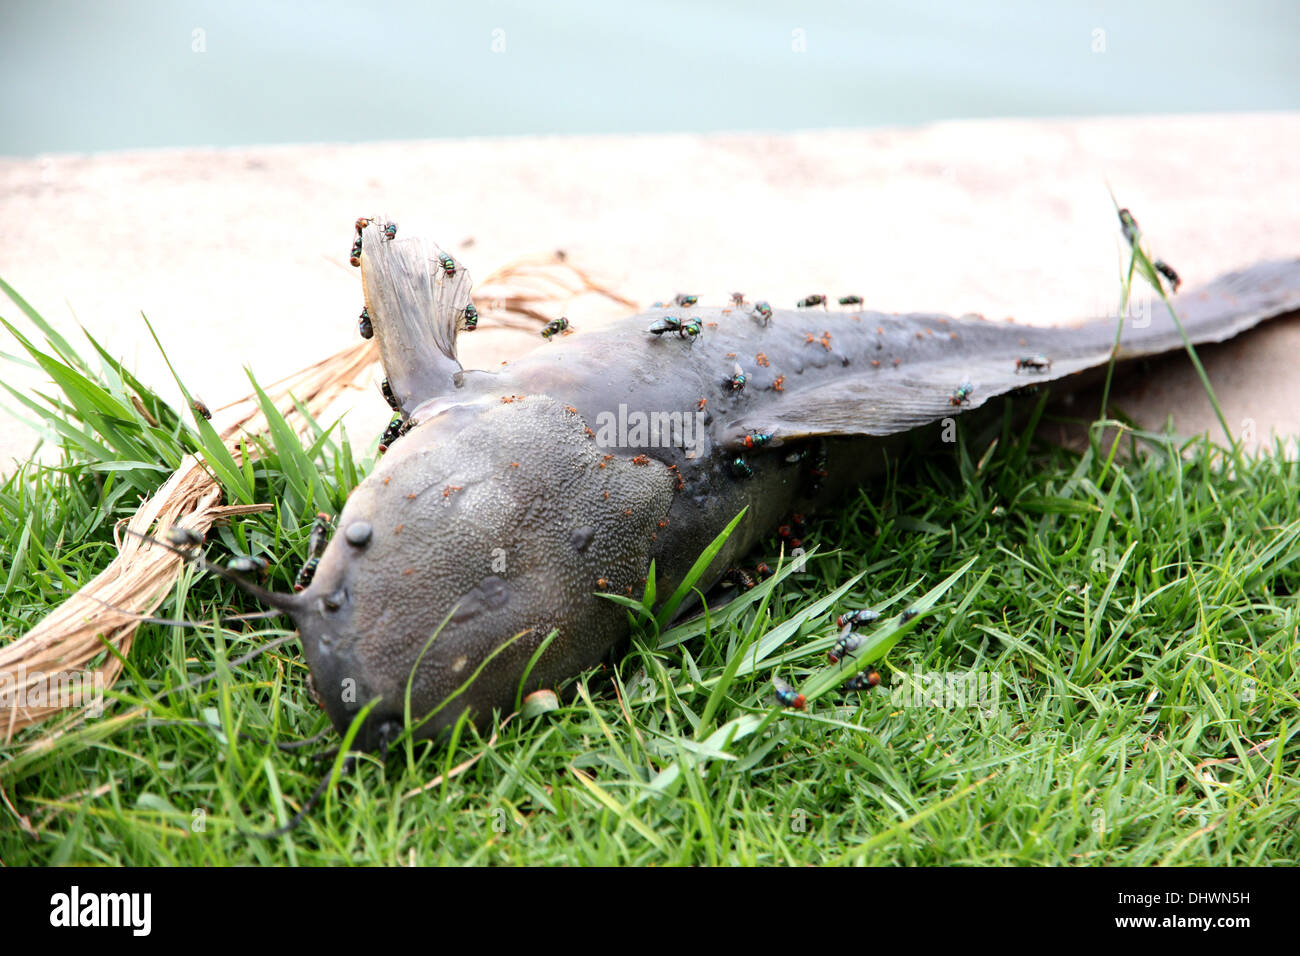 The Fish that died from the sewage and Fly swarming. Stock Photo